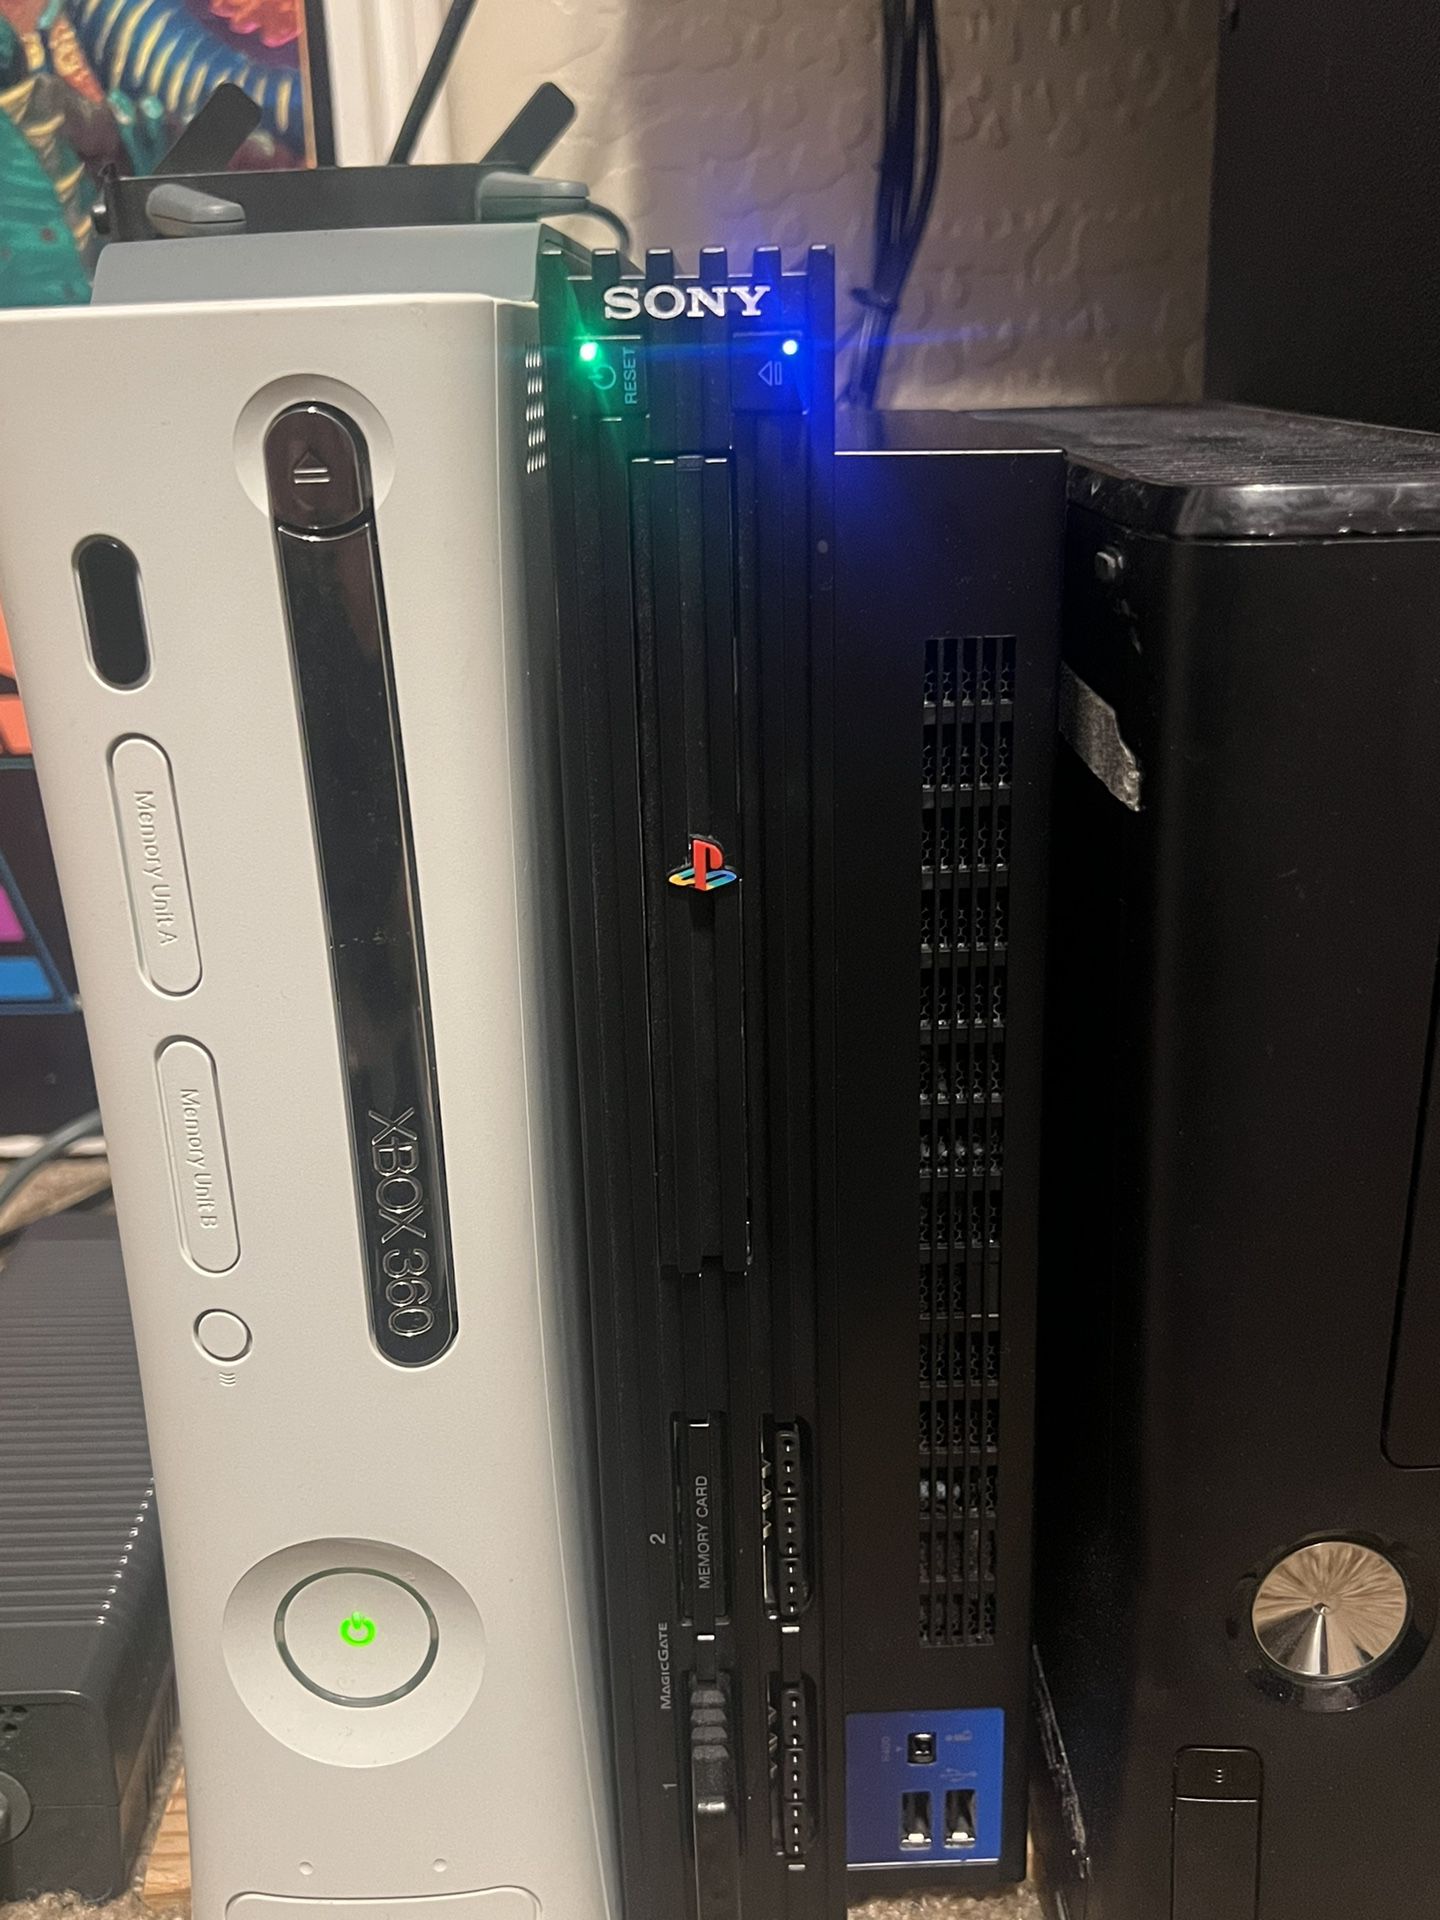 Xbox 360 rgh 2.0 for Sale in Charlotte, NC - OfferUp